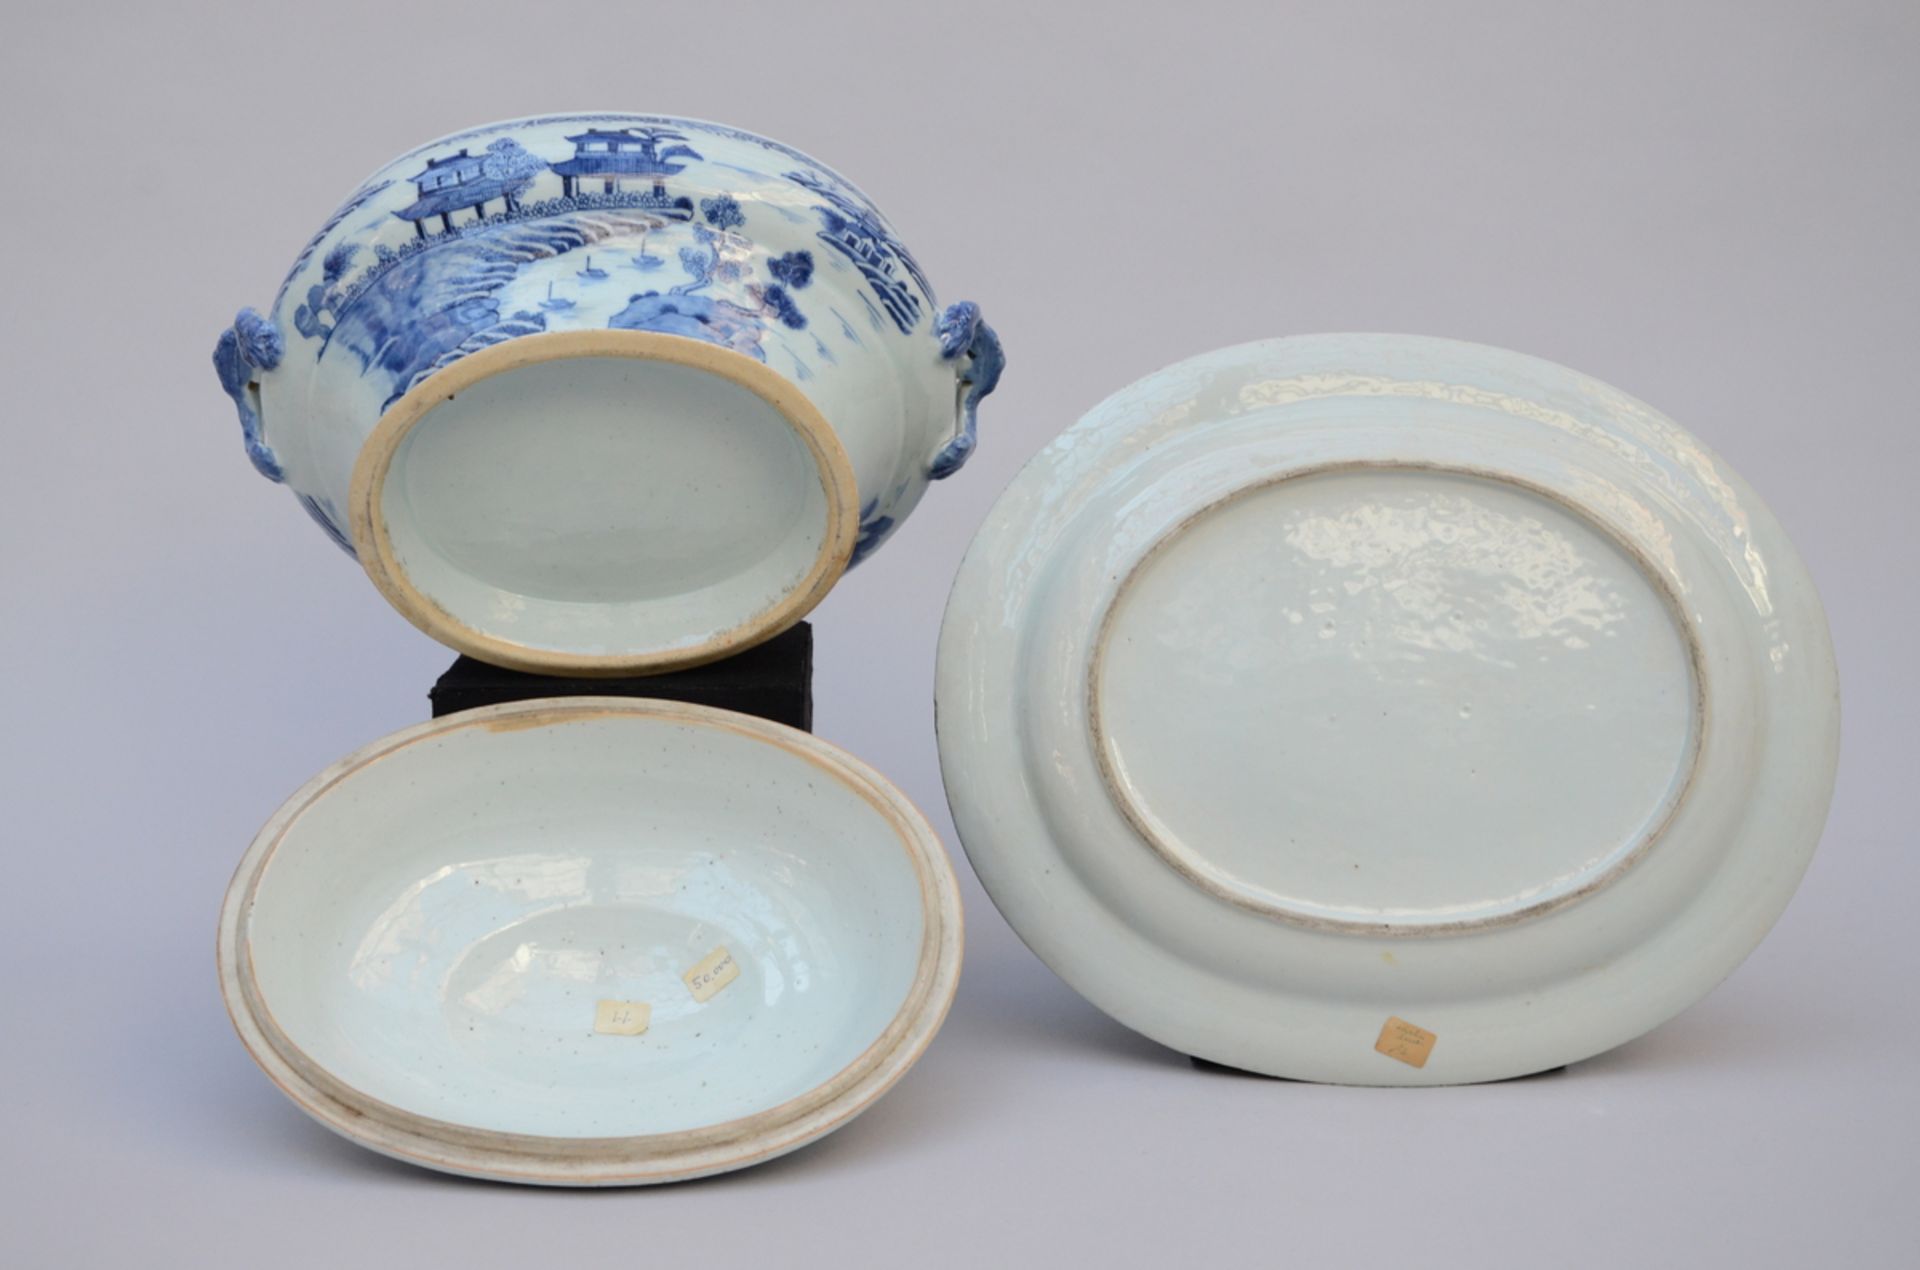 A tureen and platter in Chinese blue and white porcelain, 18th century (25x35x28cm) (*) - Image 3 of 4